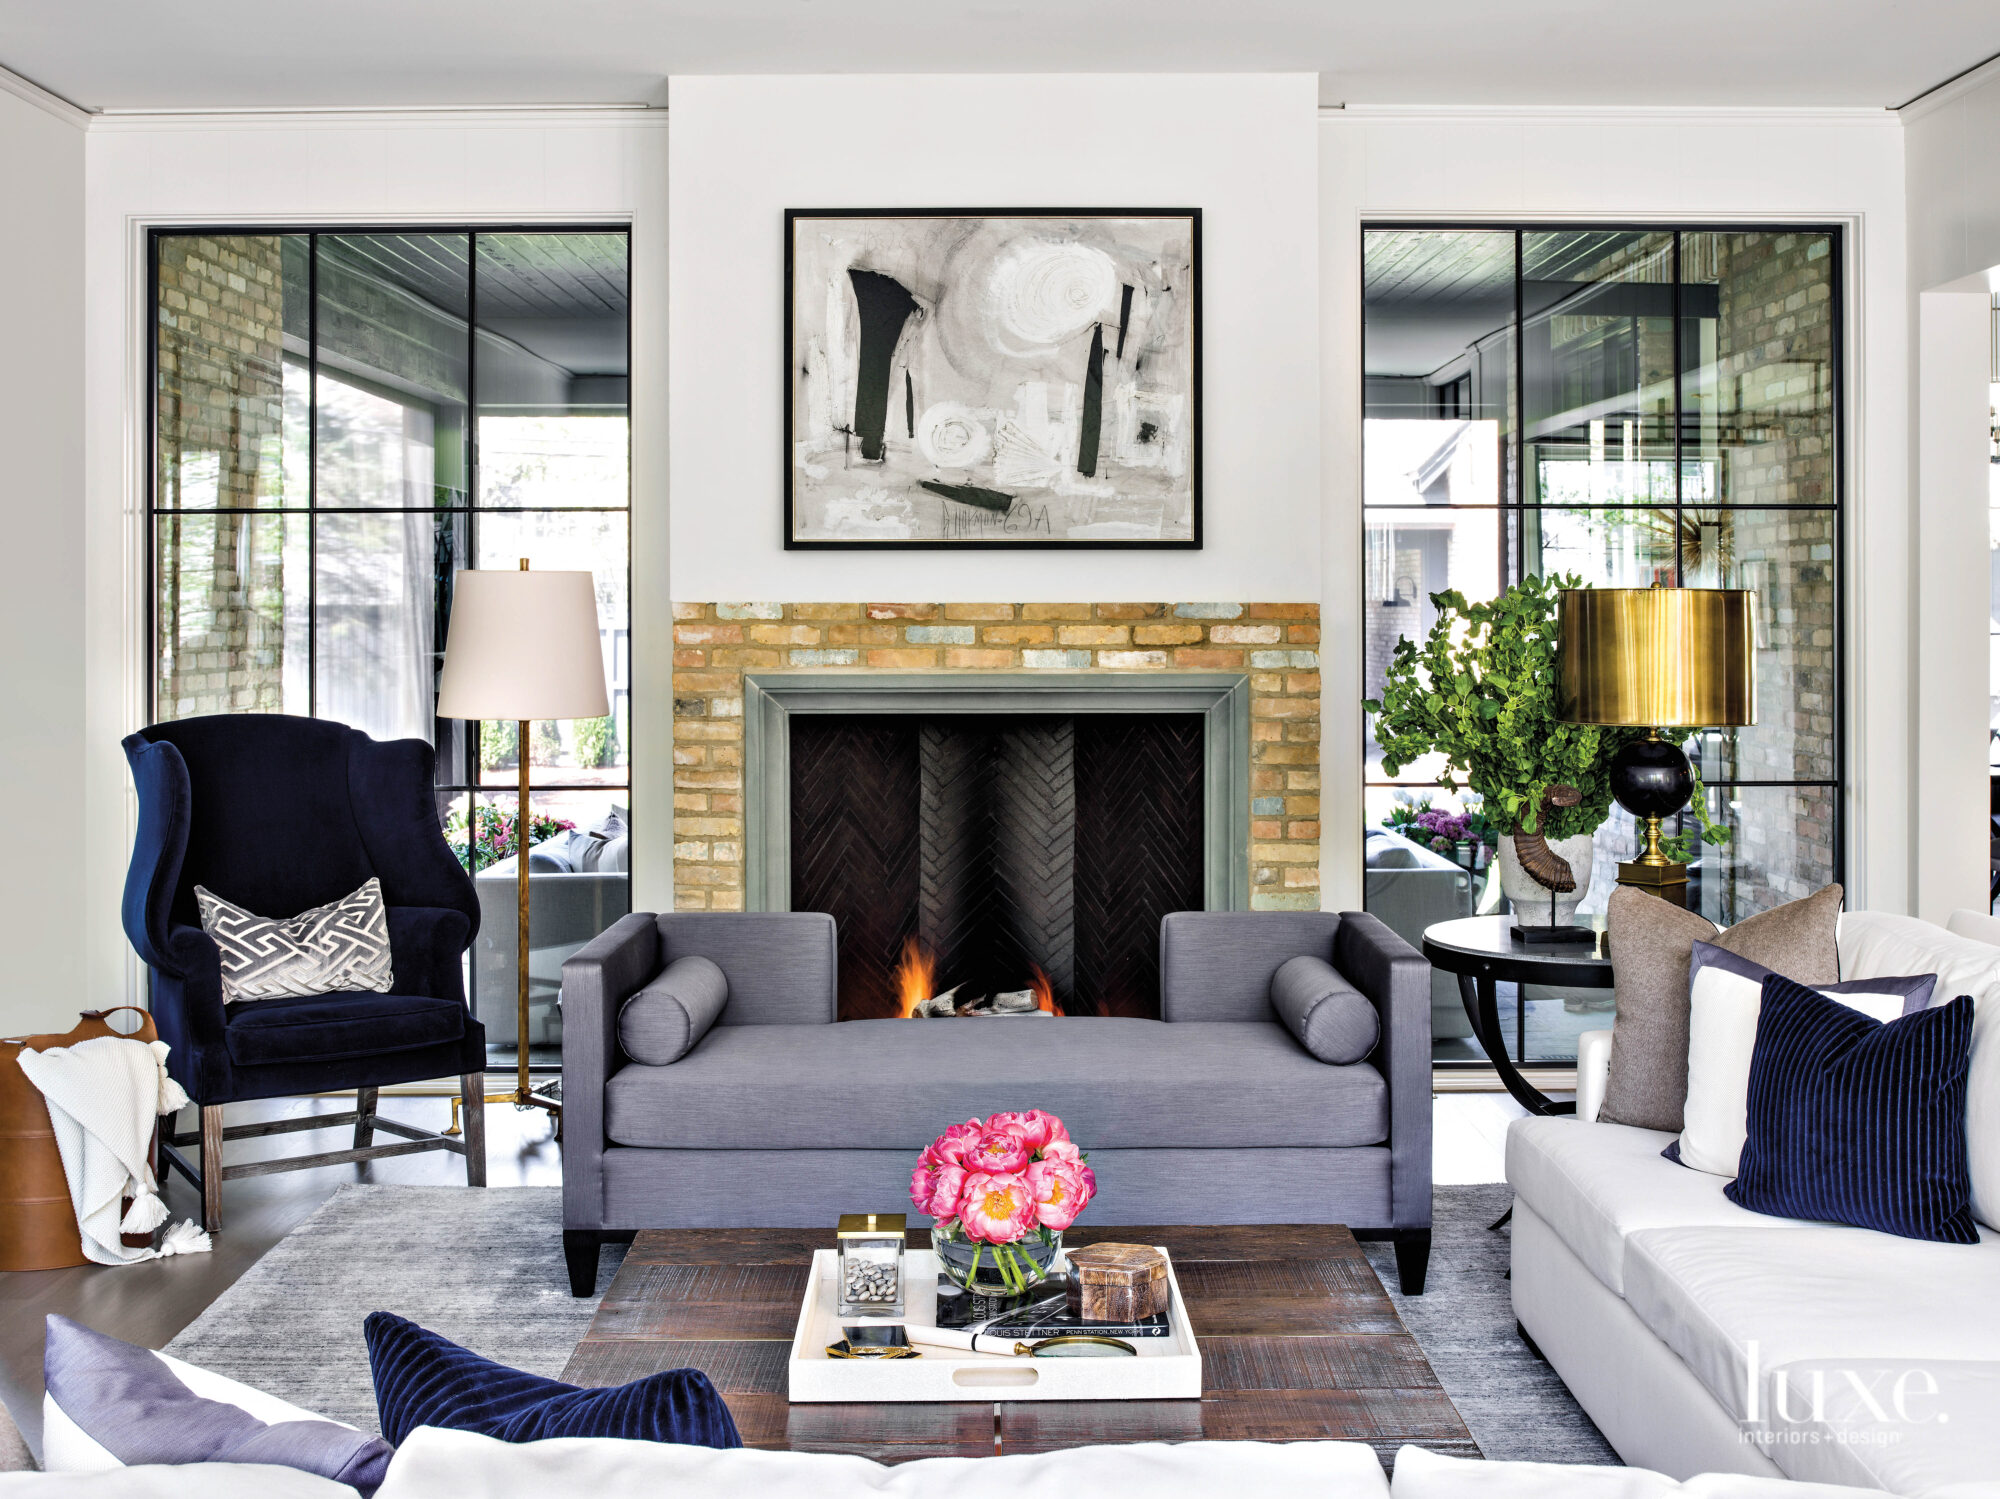 A gray chaise sits in front of a fireplace in the living room. Above it hangs an abstract painting by Graham Harmon.